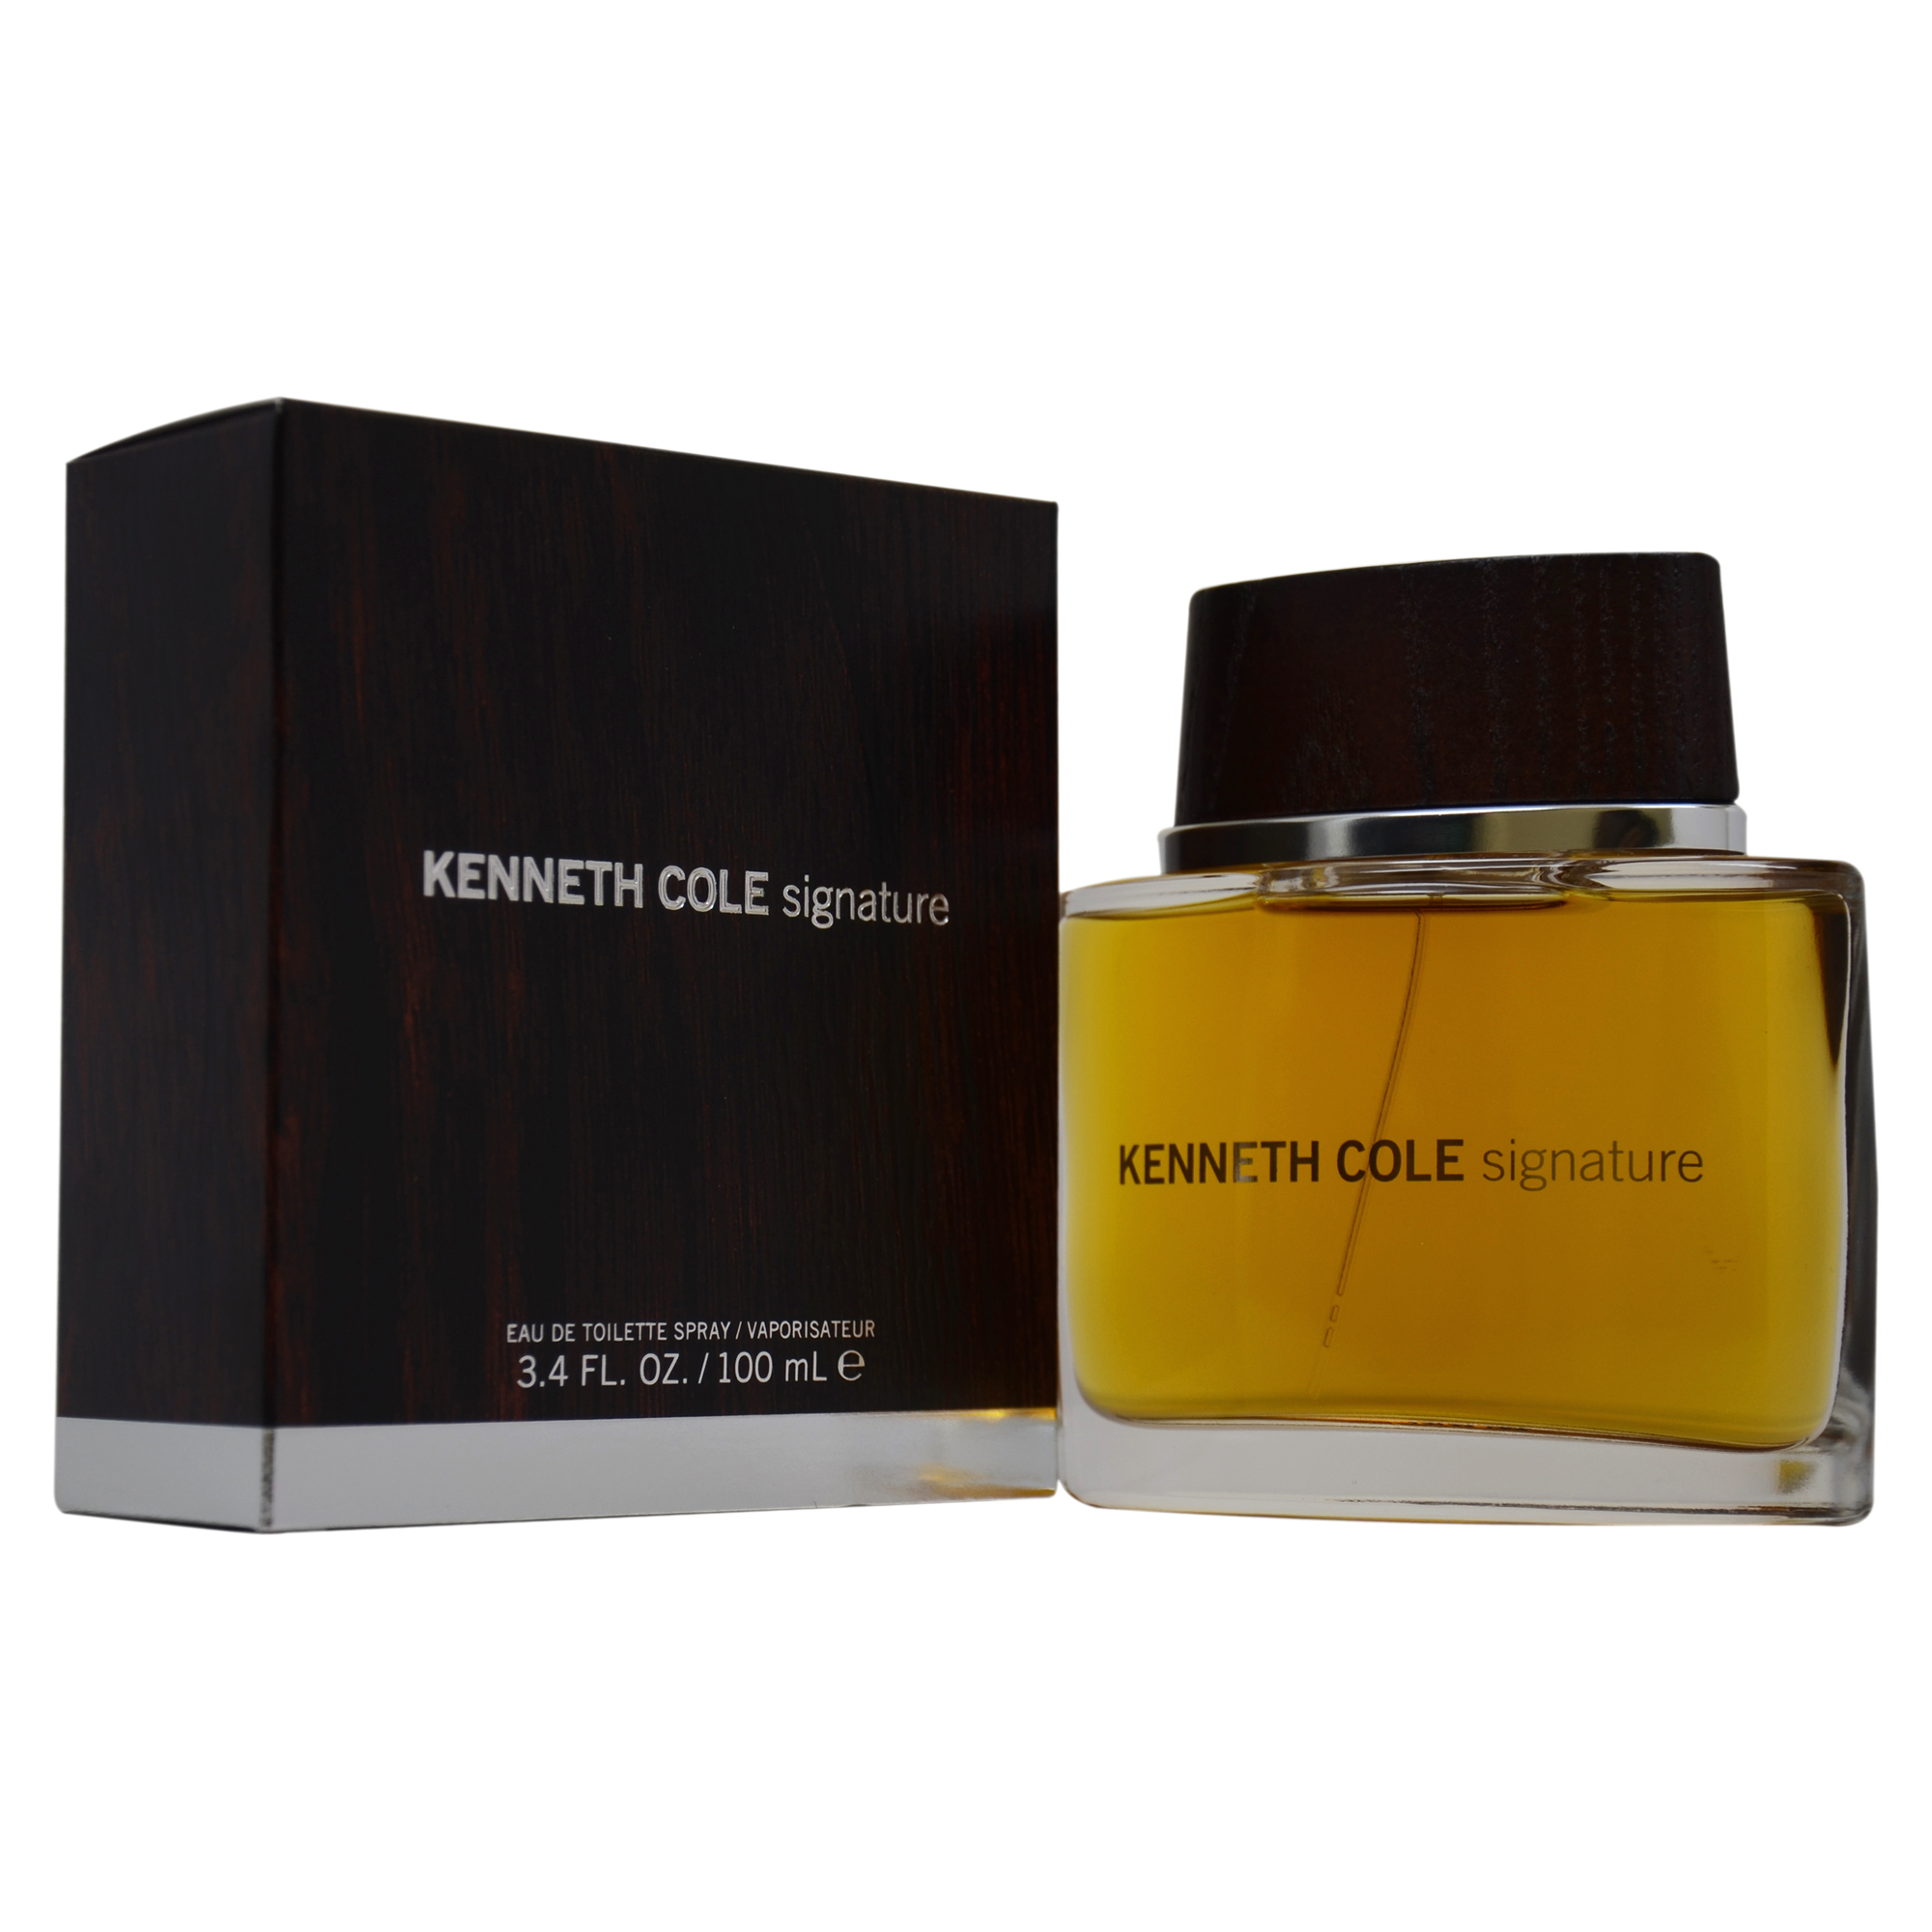 Kenneth Cole Signature by Kenneth Cole for Men - 3.4 oz EDT Spray